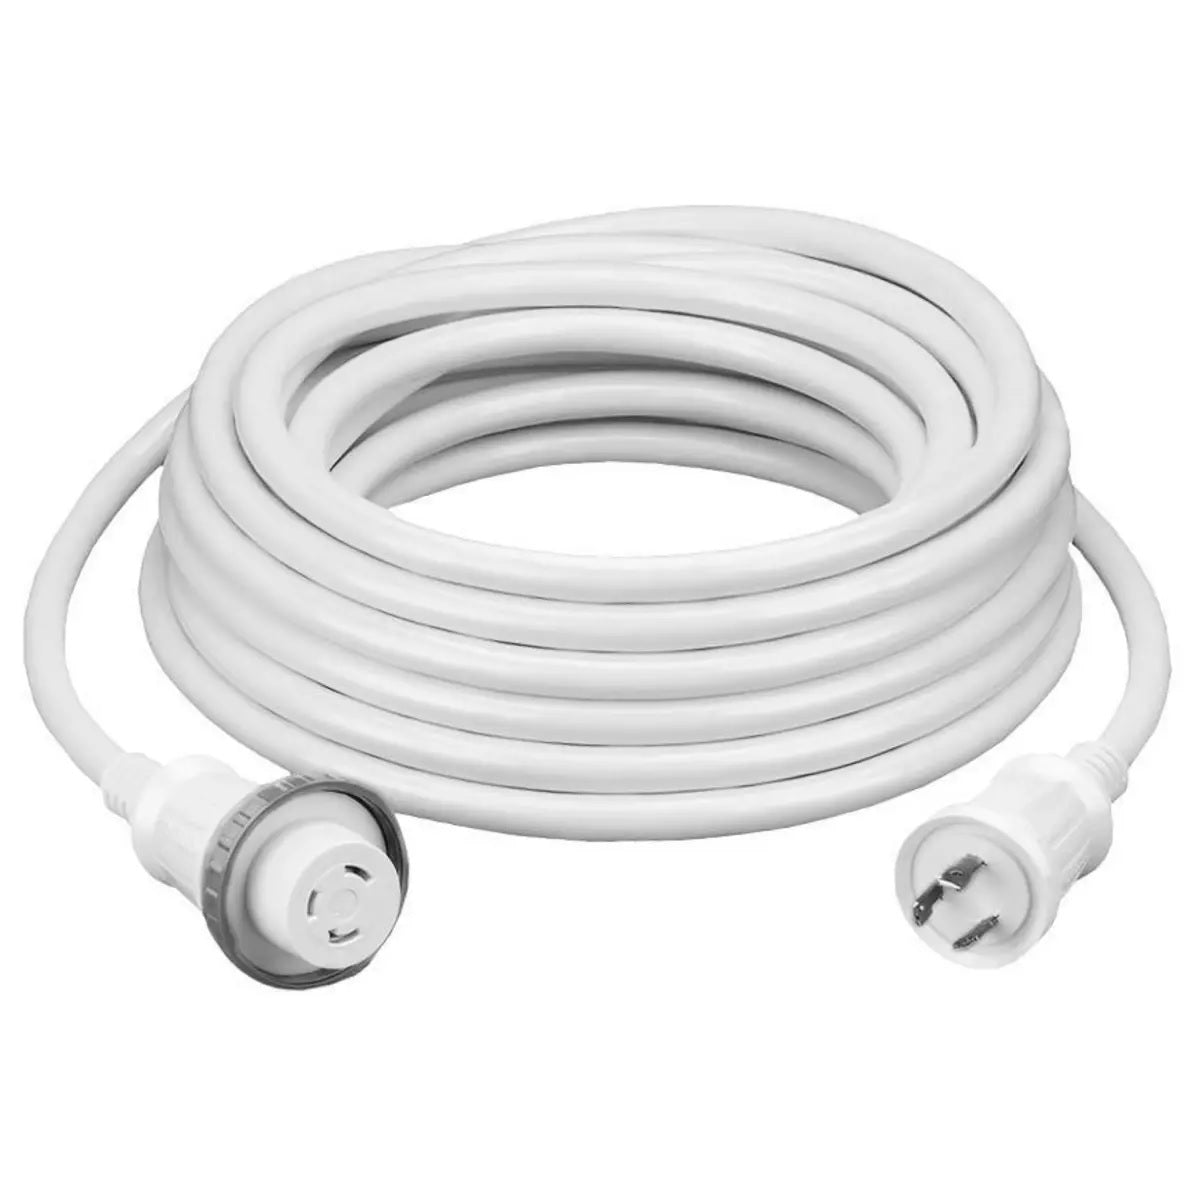 Hubbell HUBHBBL61CM03W 30A 25 Foot White Shore Cord